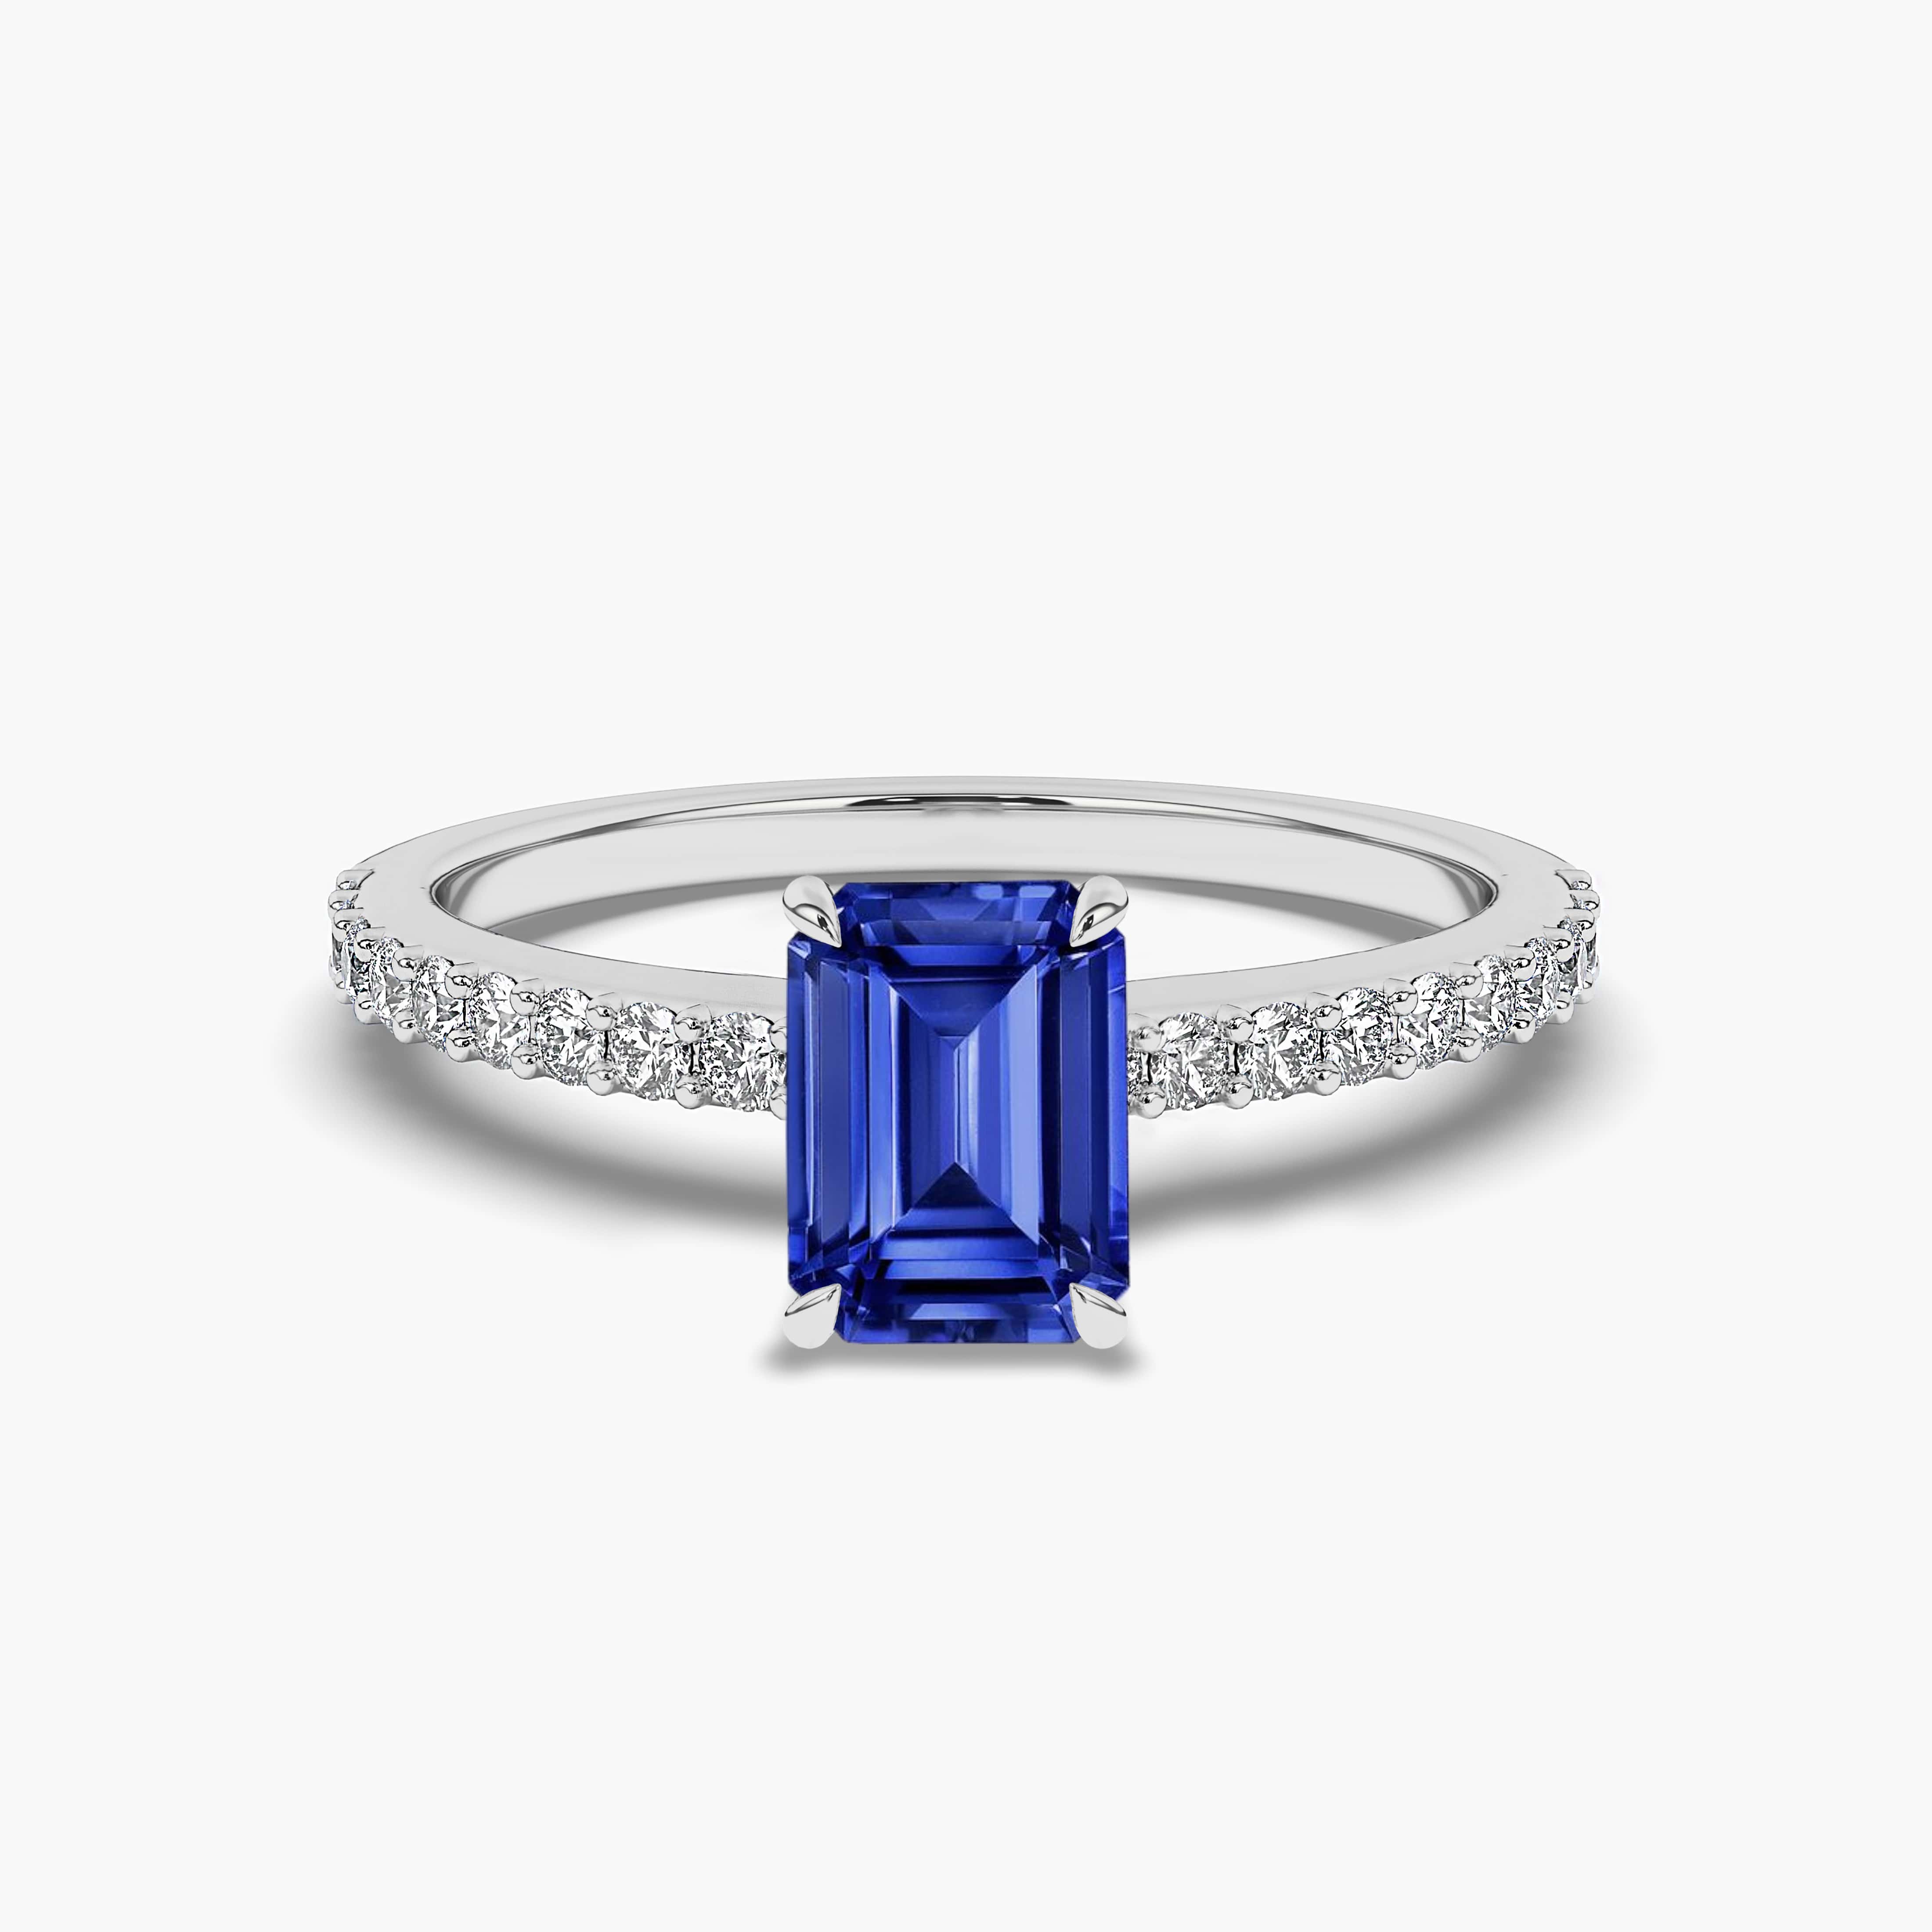 Emerald Cut Sapphire and Diamond Ring in white gold